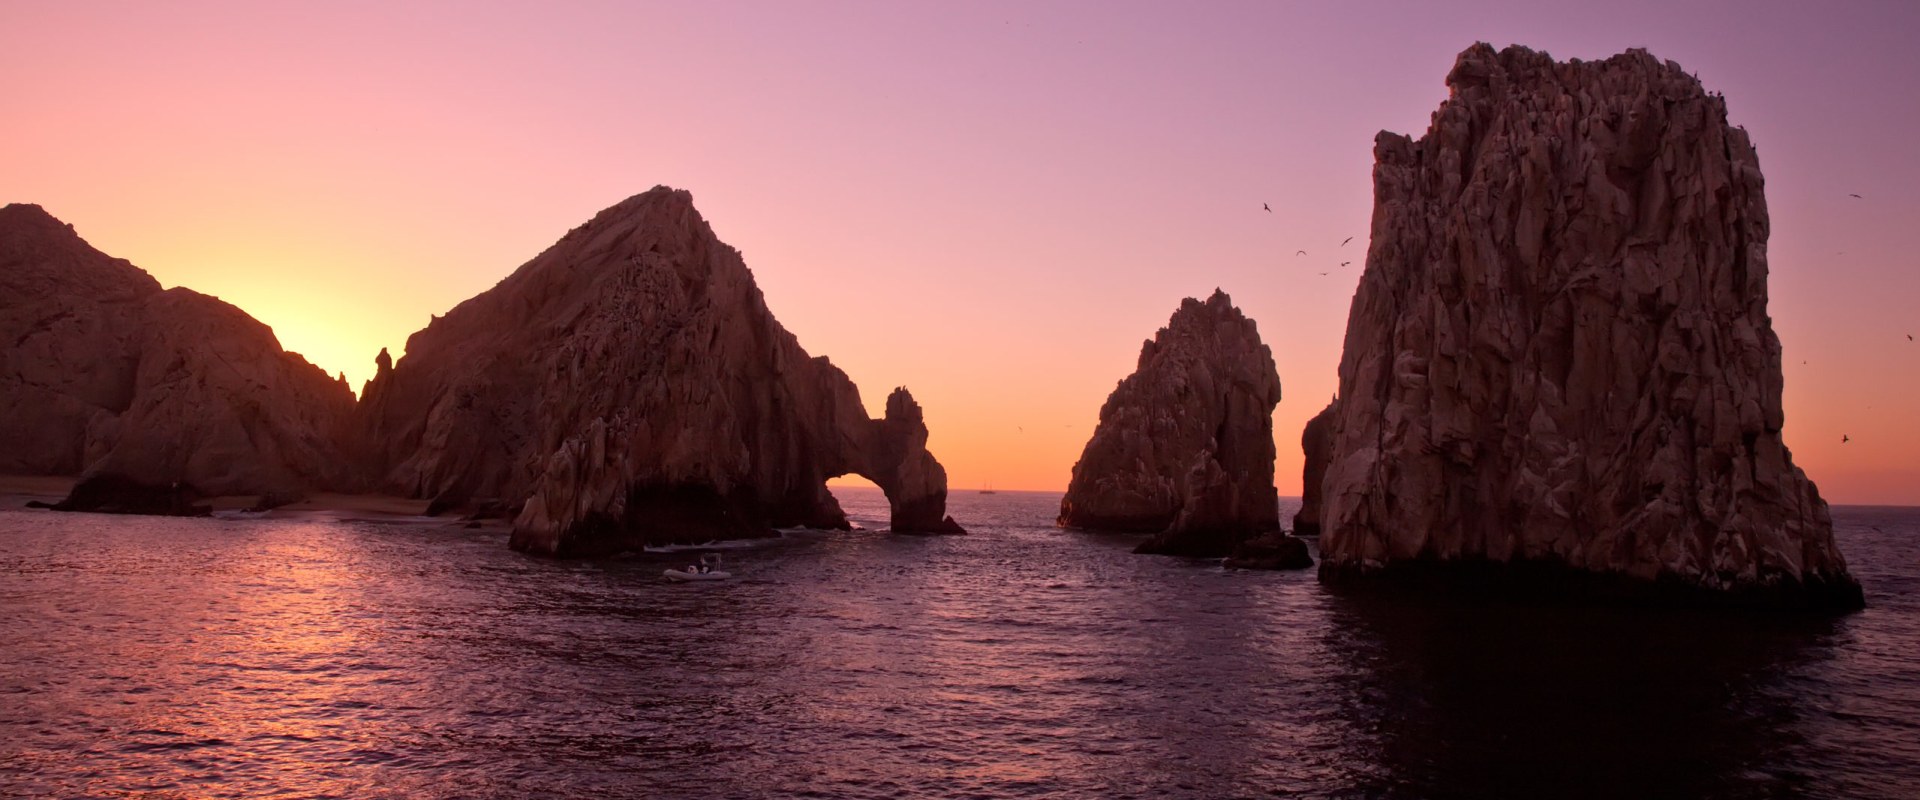 What Should You Be Careful Of When Visiting Cabo San Lucas?